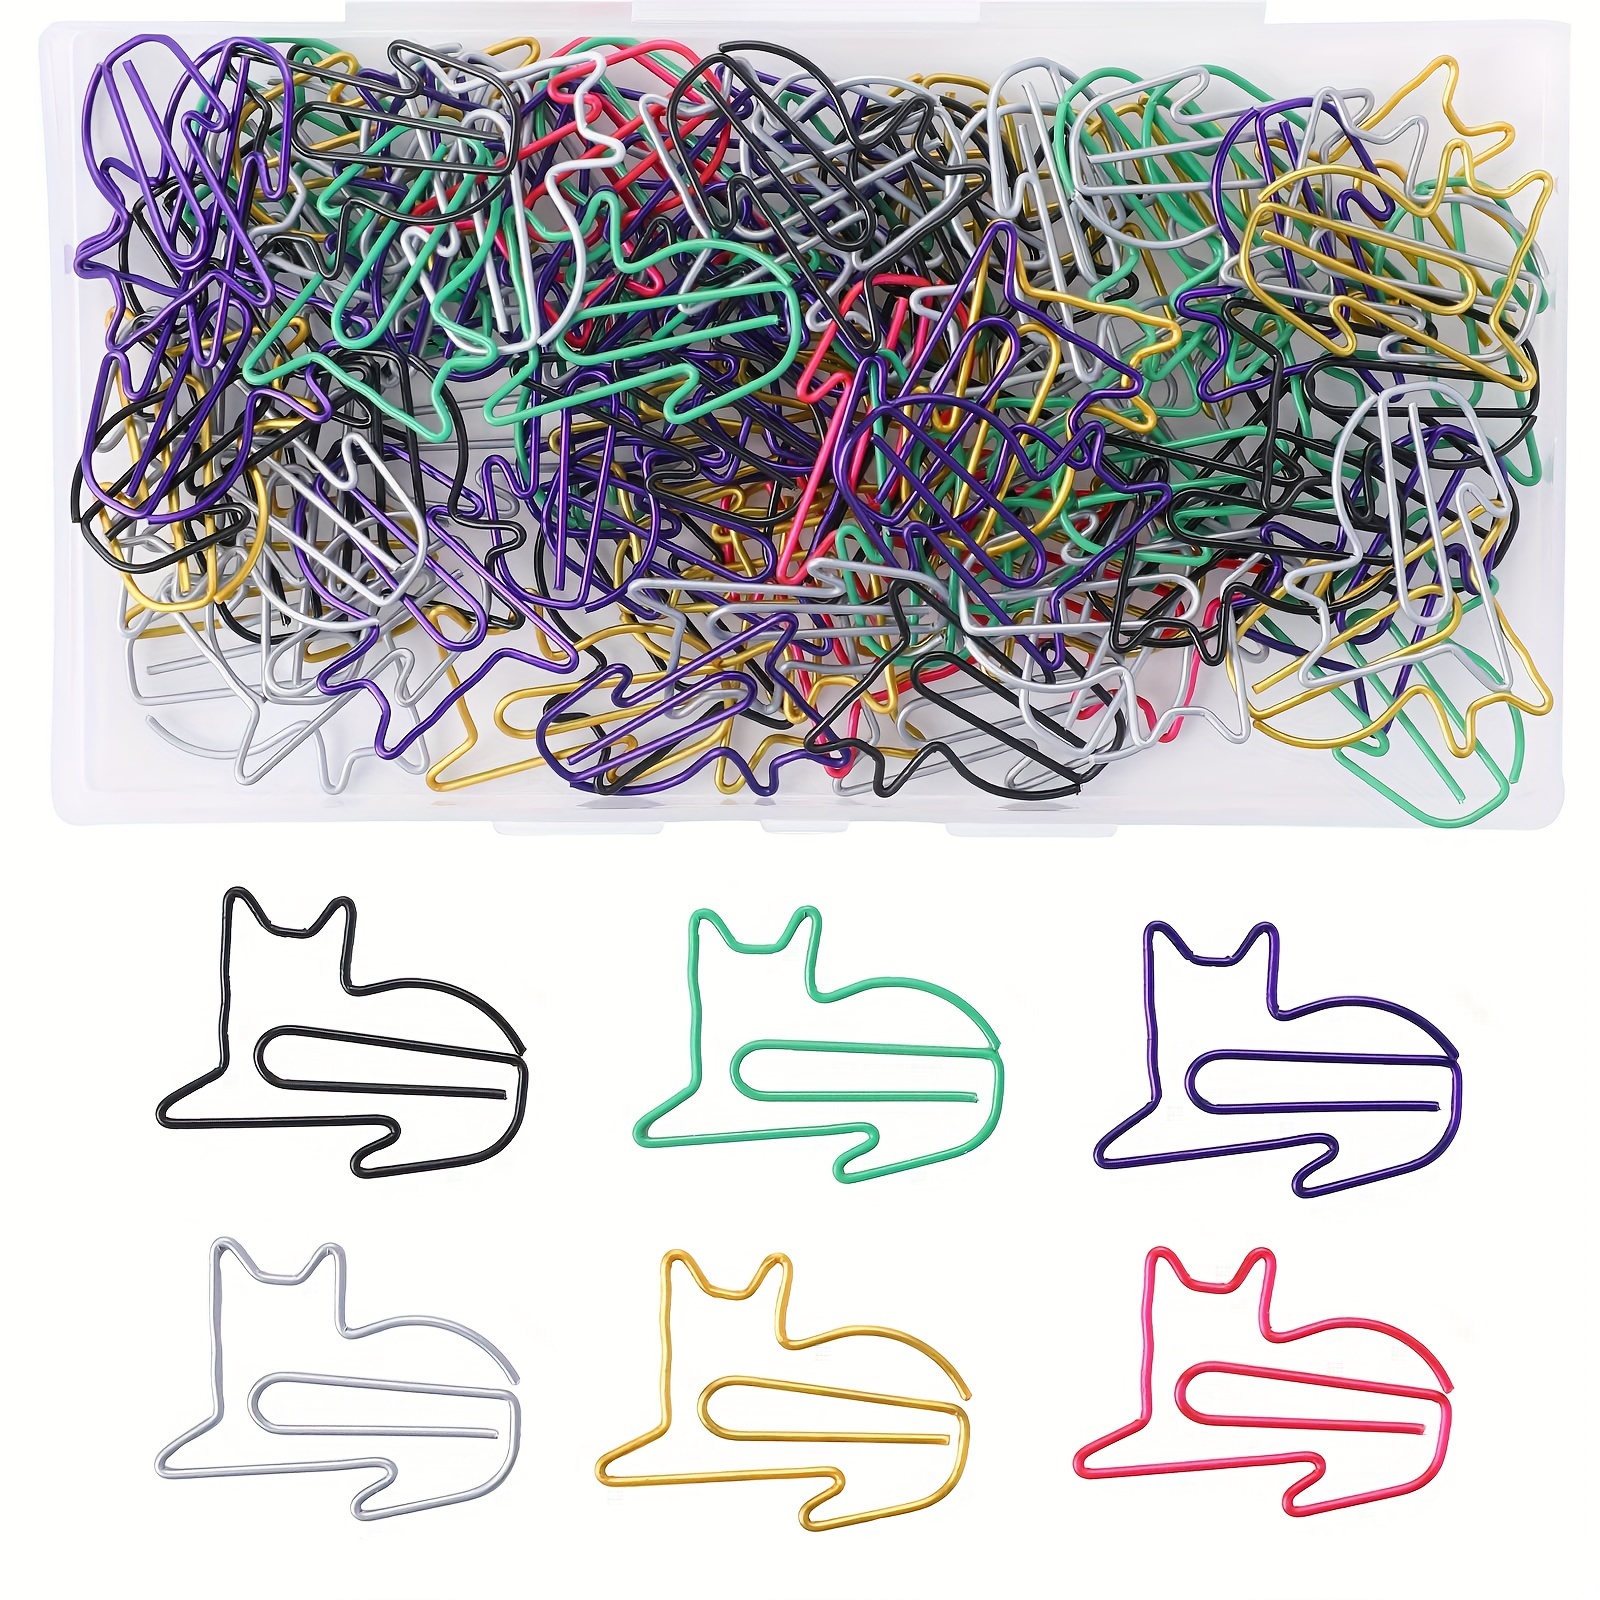 

20pcs Large Cat Paper Clips Cute Animal Shaped Paperclip 6 Colors Creative Funny Memo Clips For Adorable Bookmarks Office Supplies Gifts For Women Men Cat Lovers